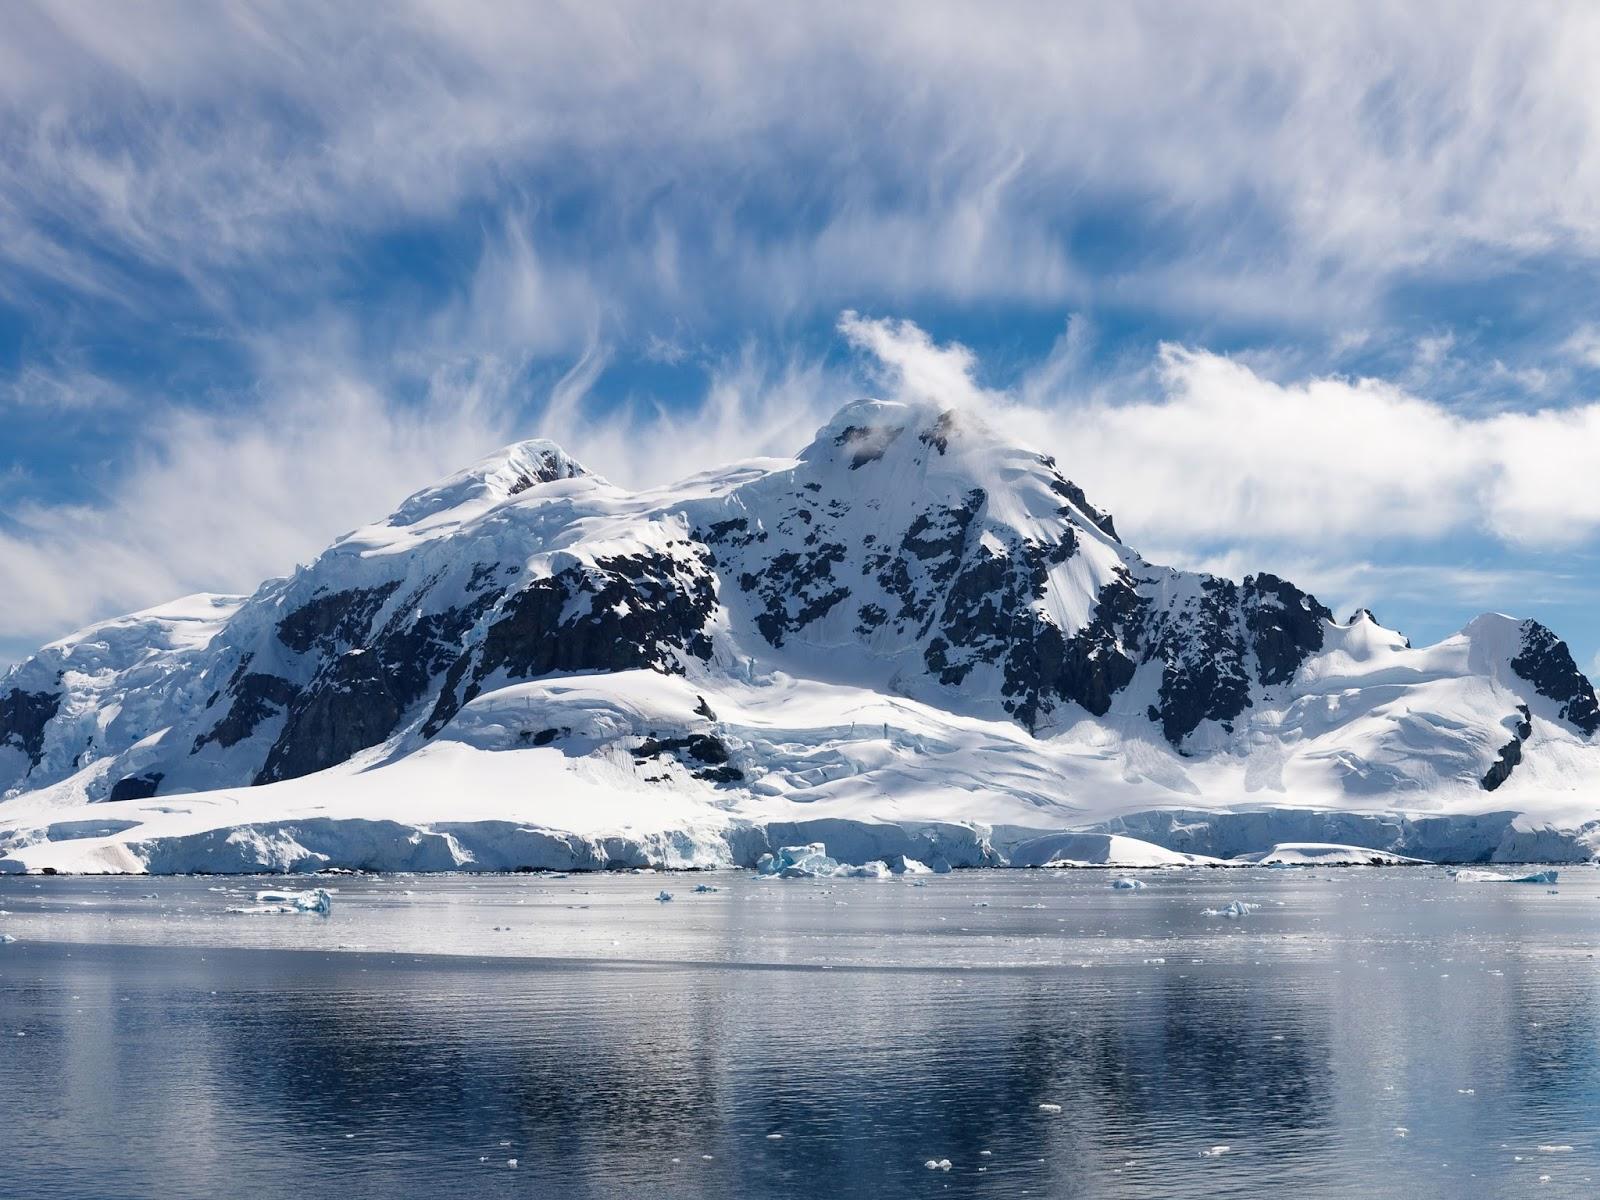 Ultima Thule: Paradise Bay, a stunning historic harbour in Antarctica